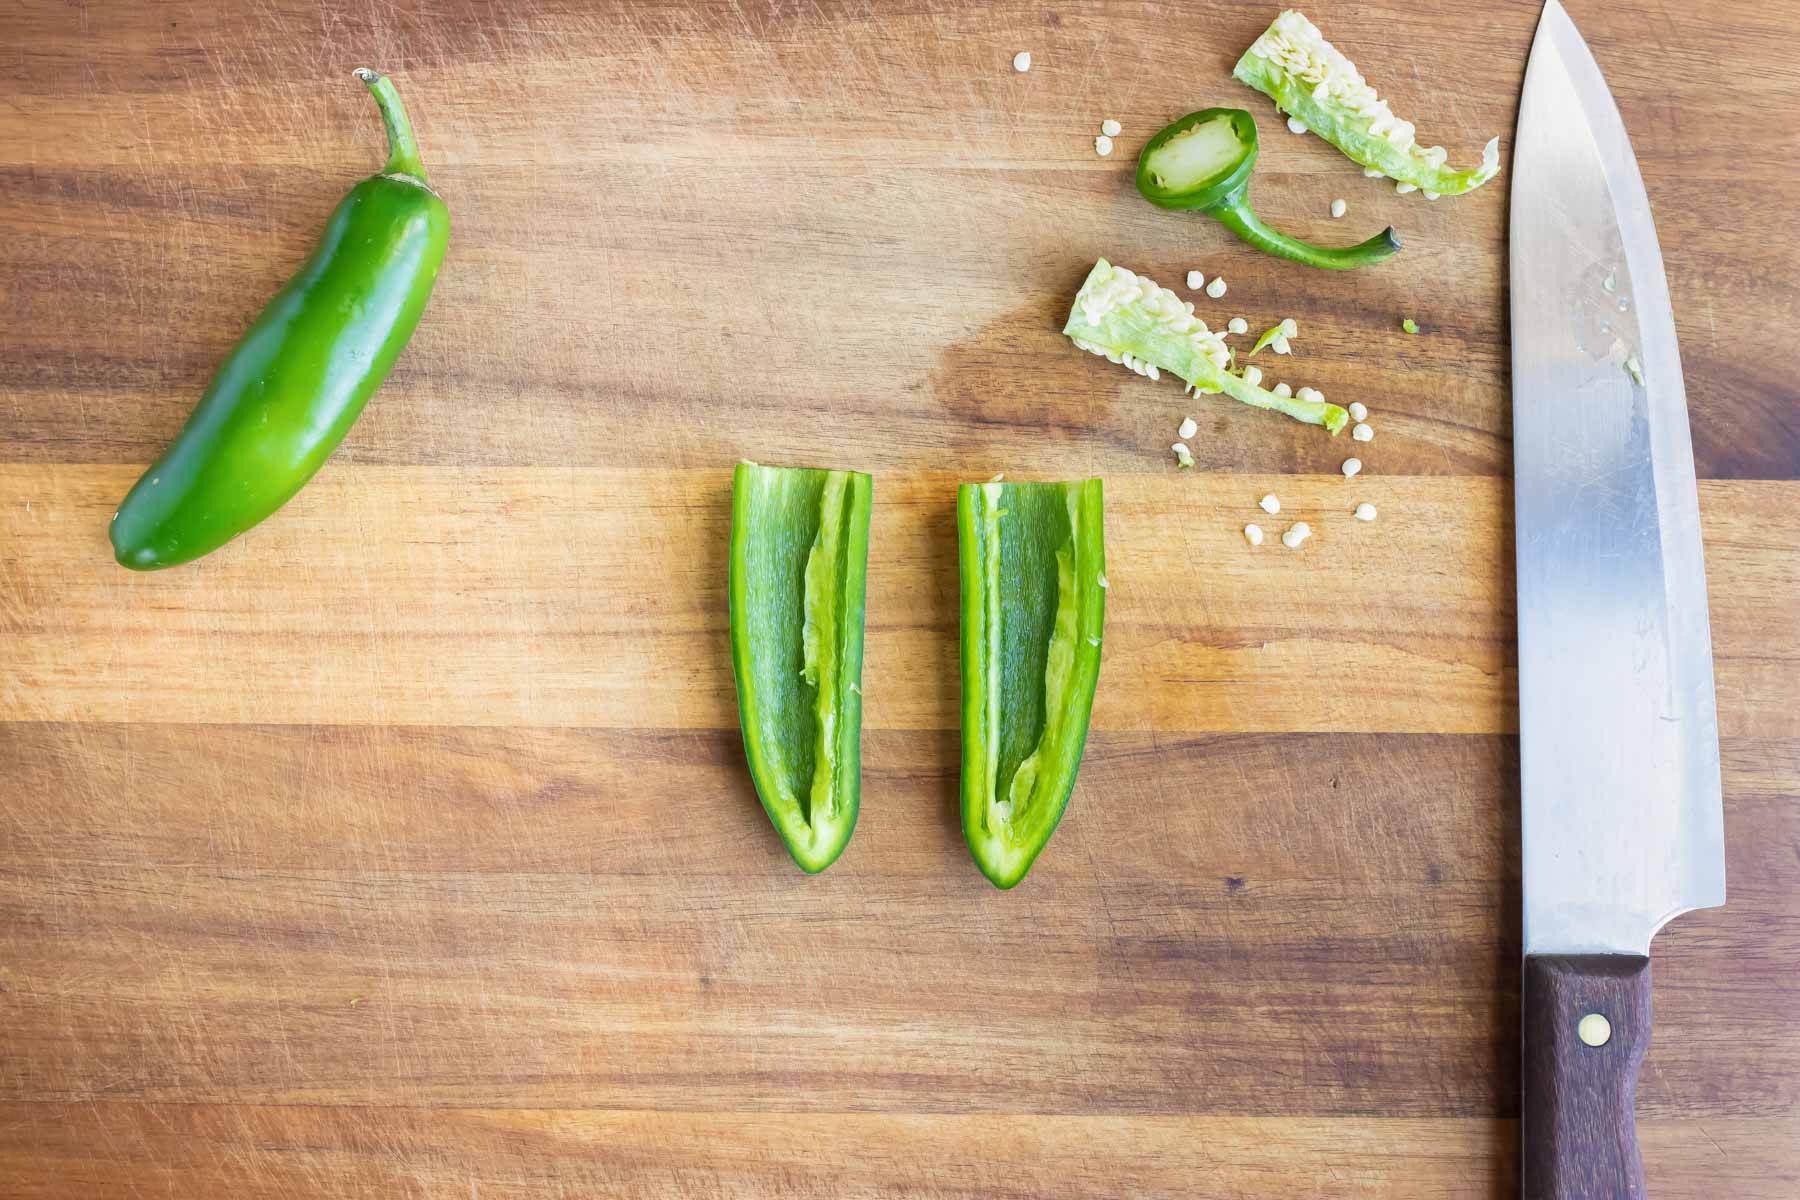 The jalapeño pepper is shown on a cutting board after being cut in half.